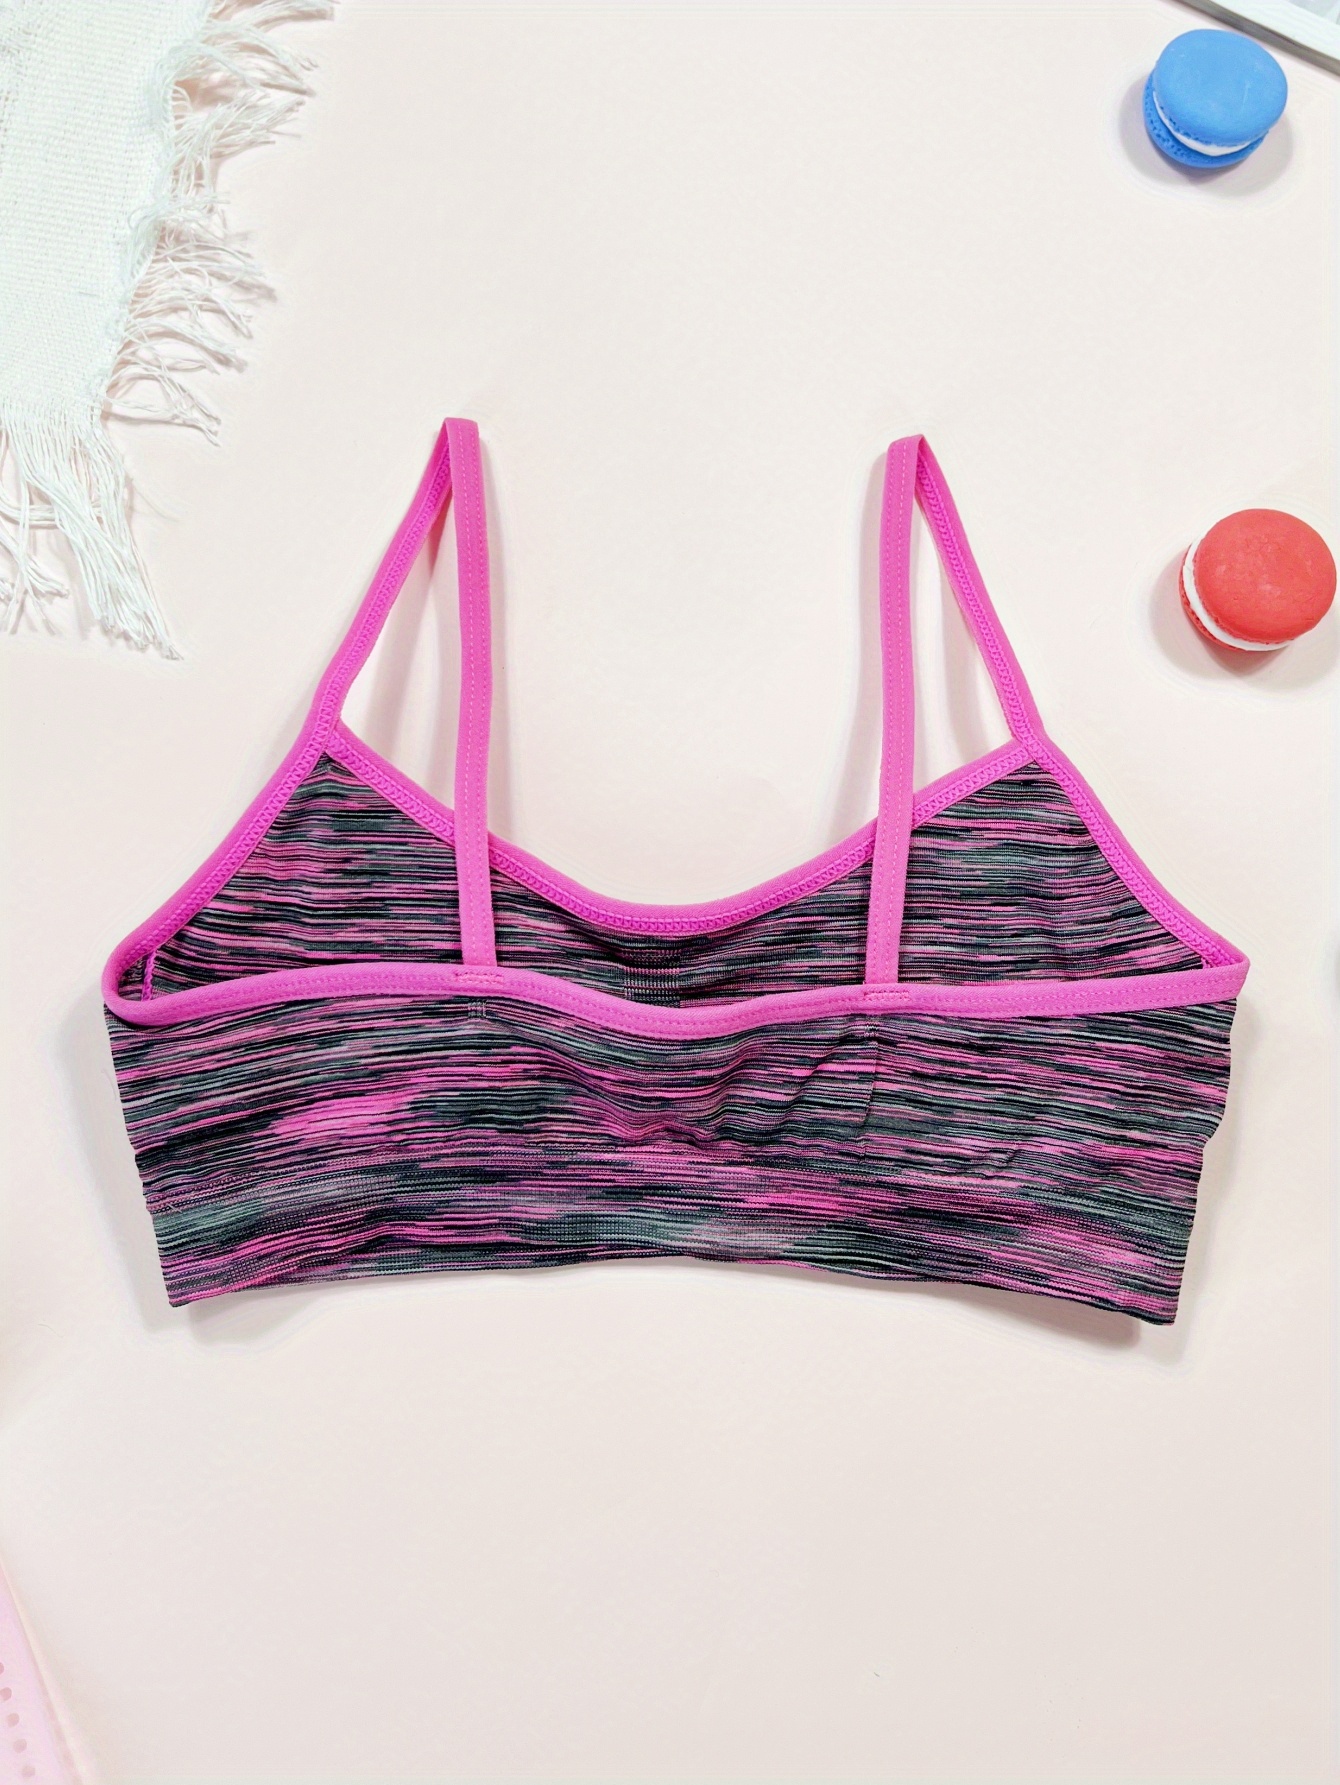 Girl's Sports Bra Breathable Comfy Underwear For Teens 12 16